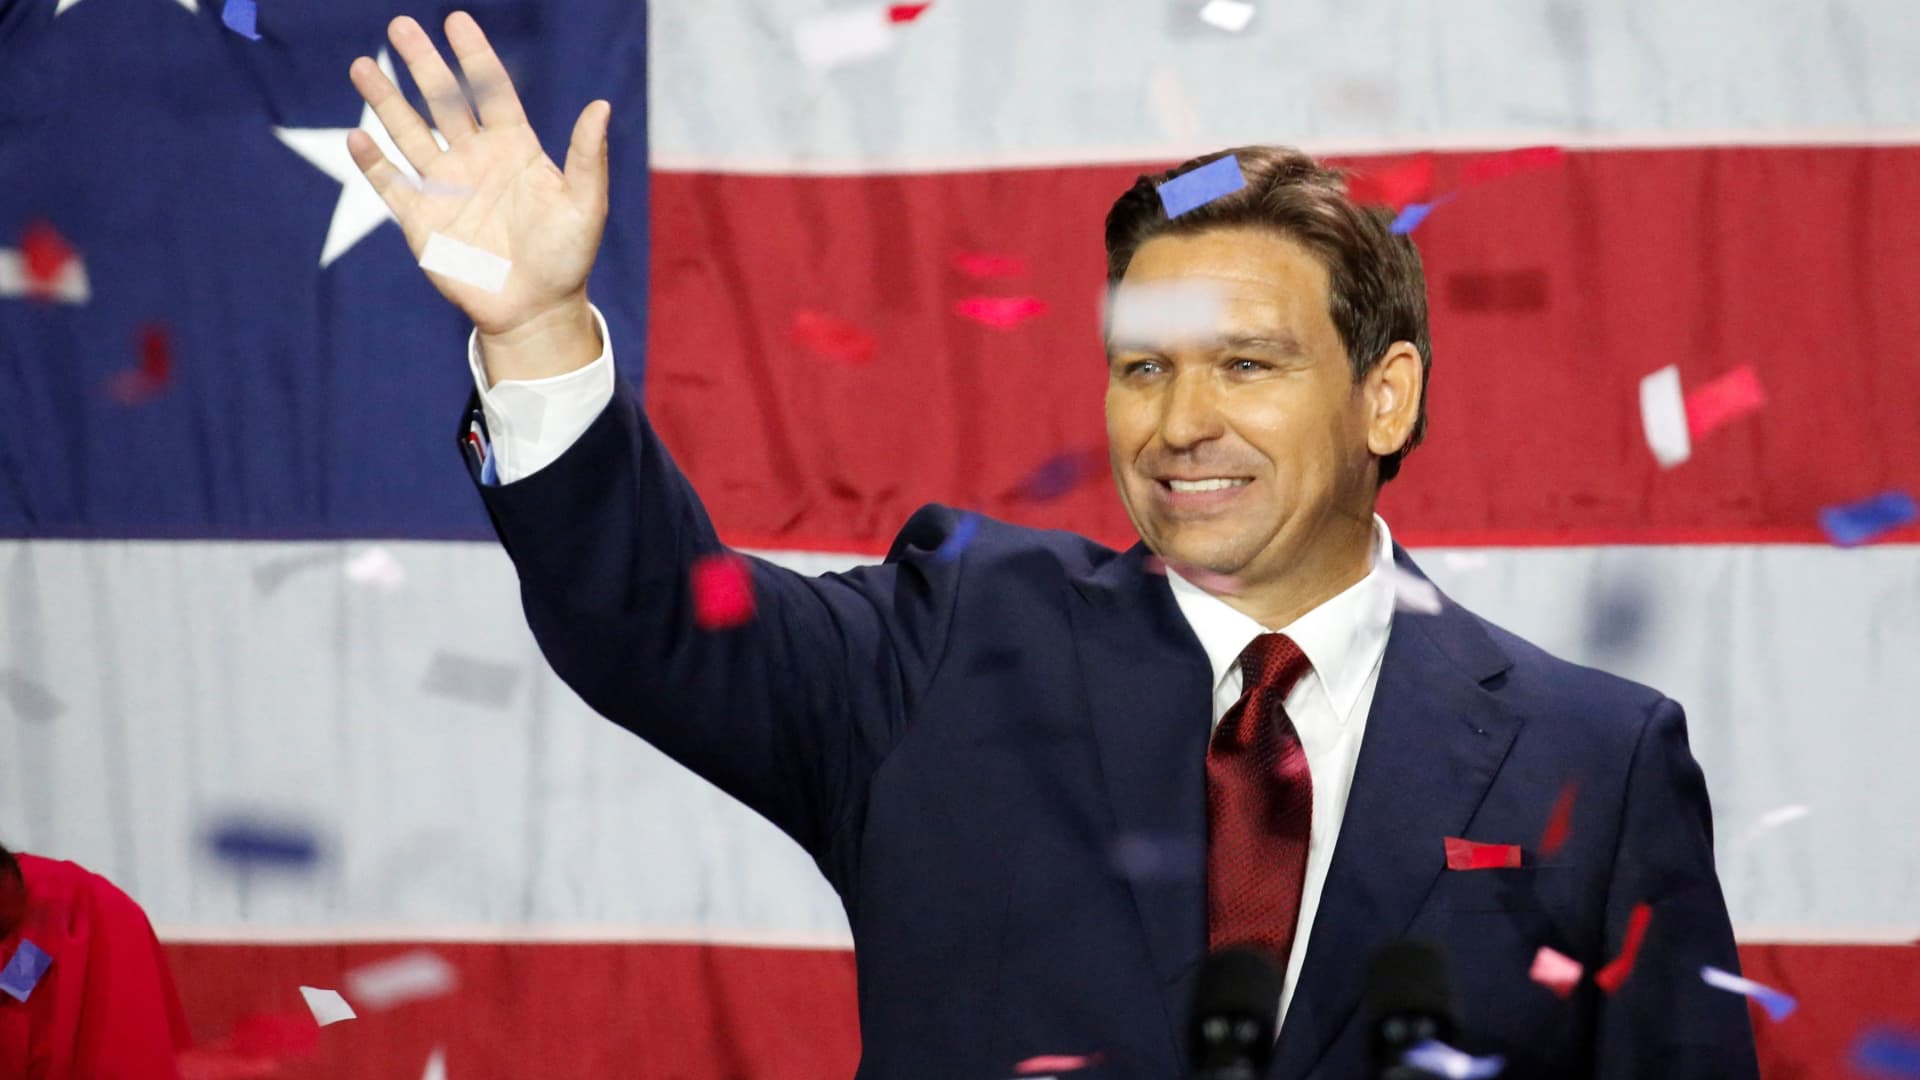 Ron DeSantis lines up business leaders to raise money for 2024 presidential run